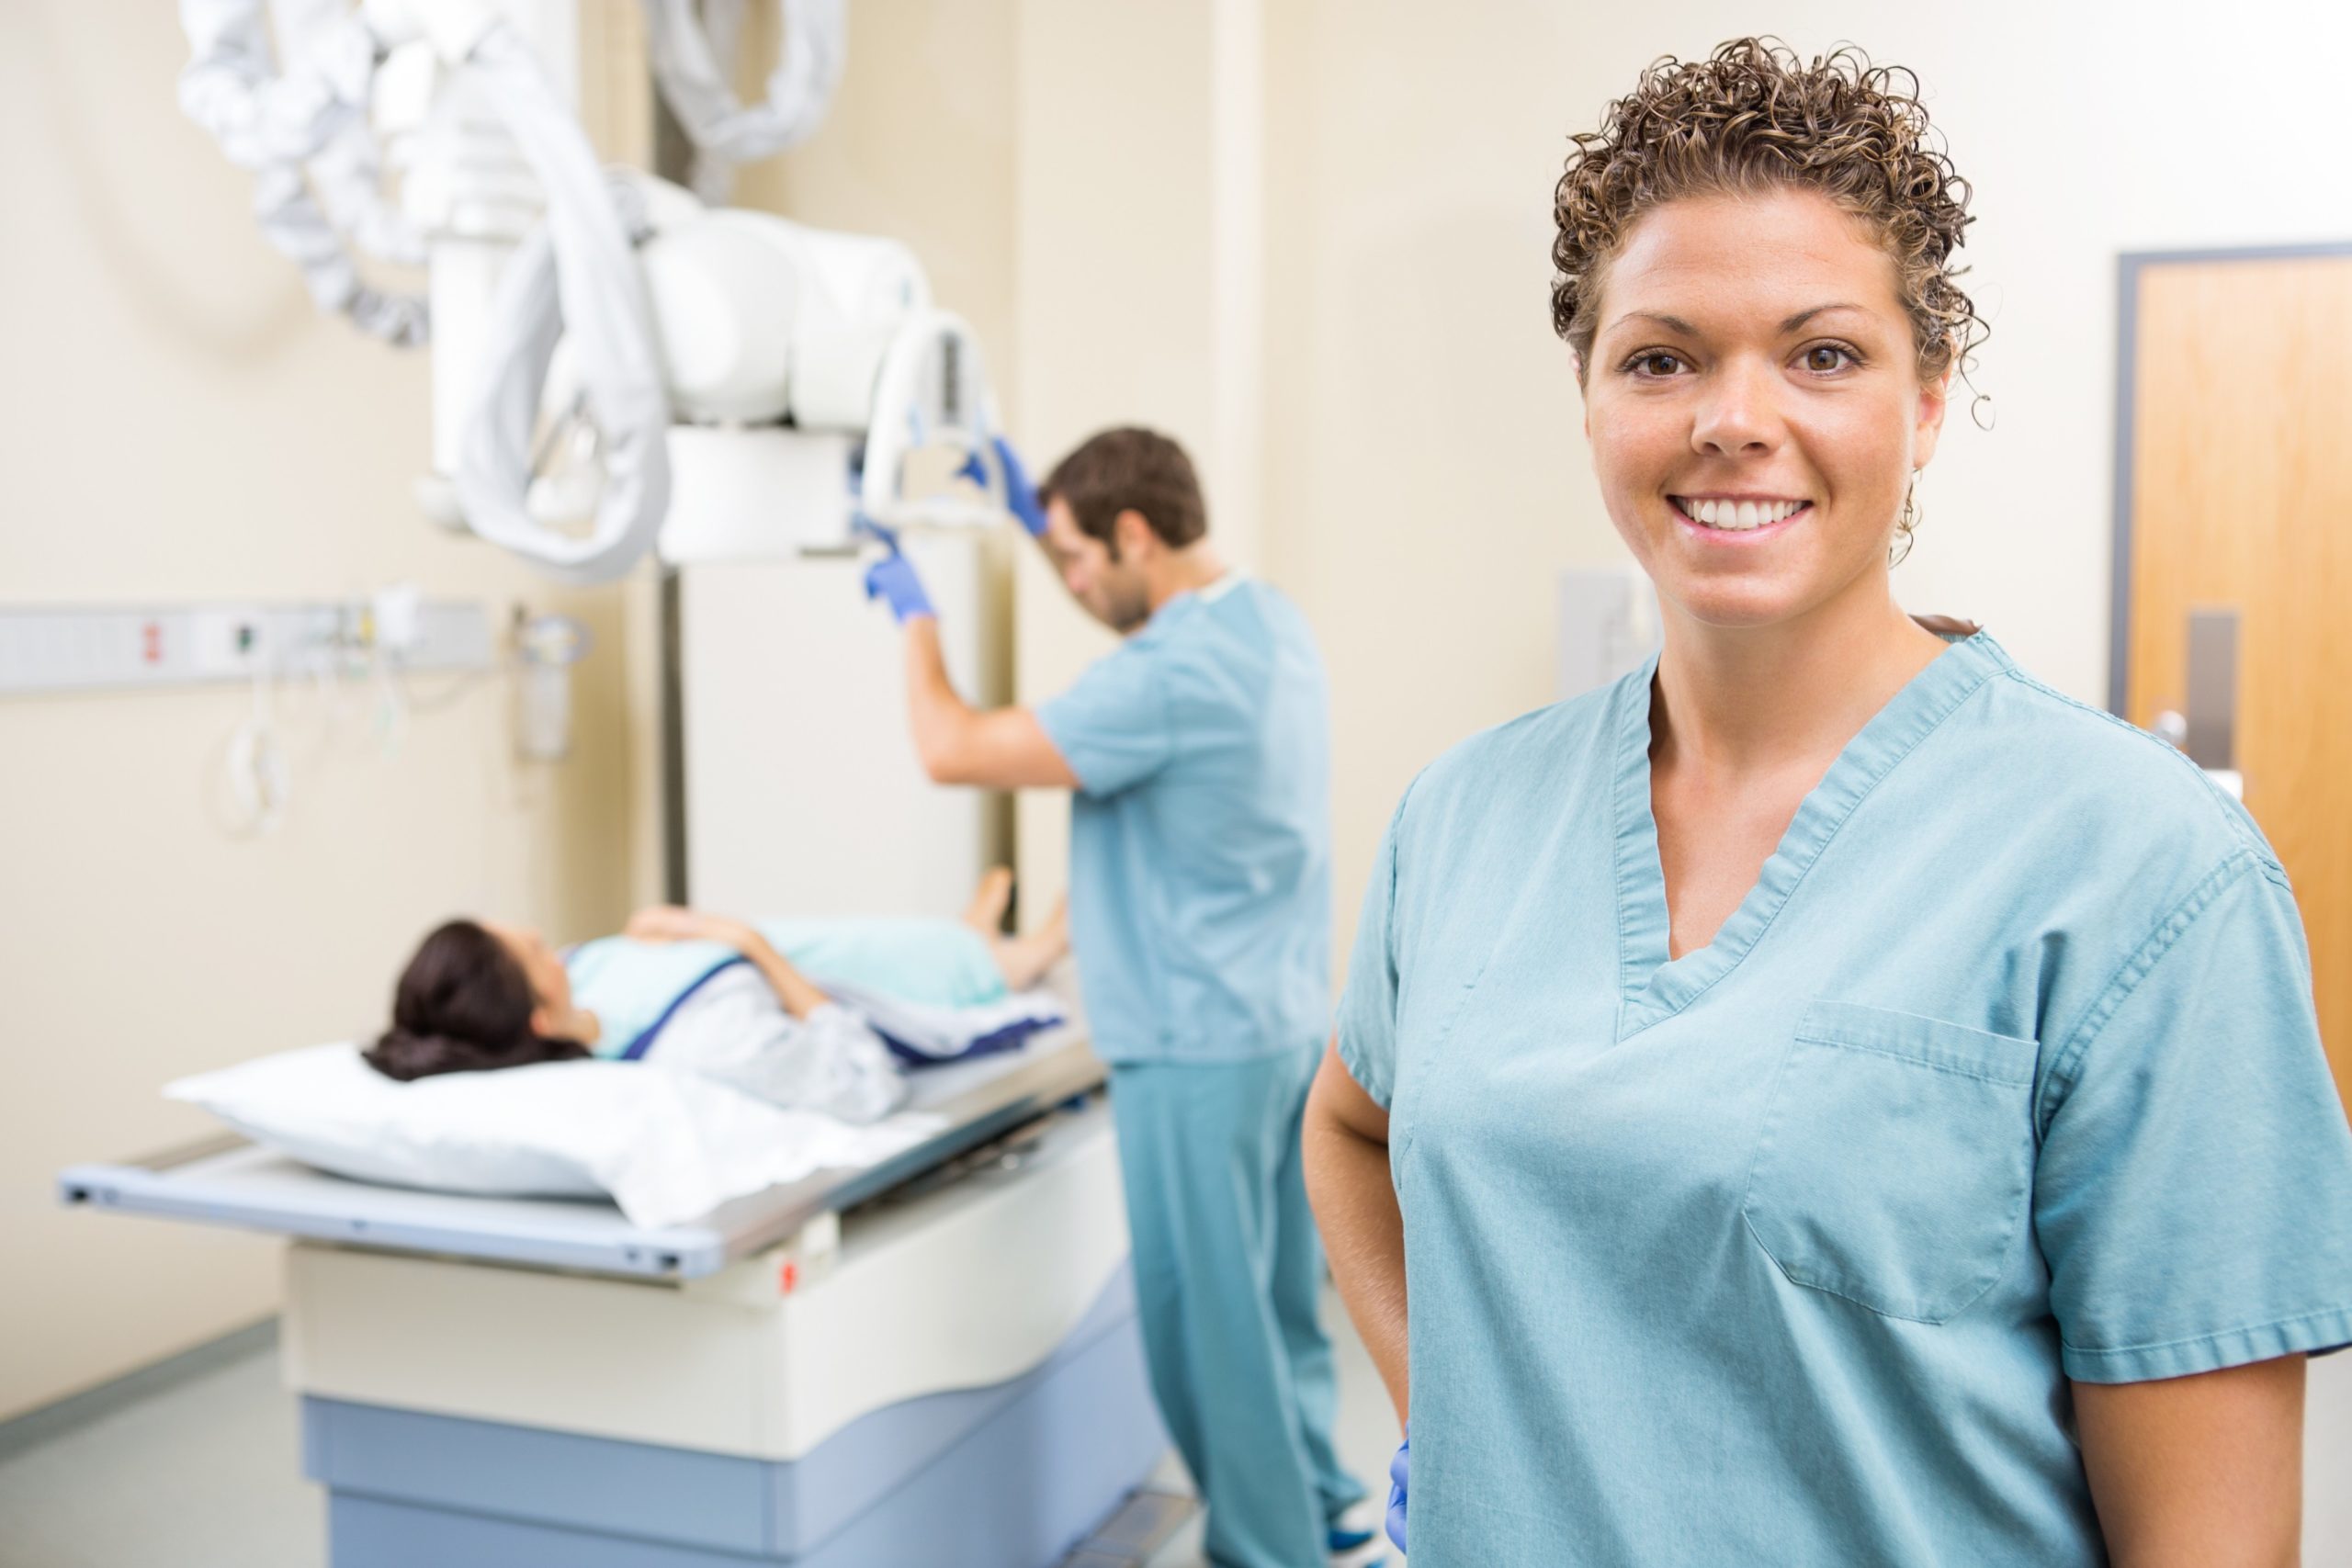 Portrait of radiologist smiling while colleague preparing patient for xray in examination room